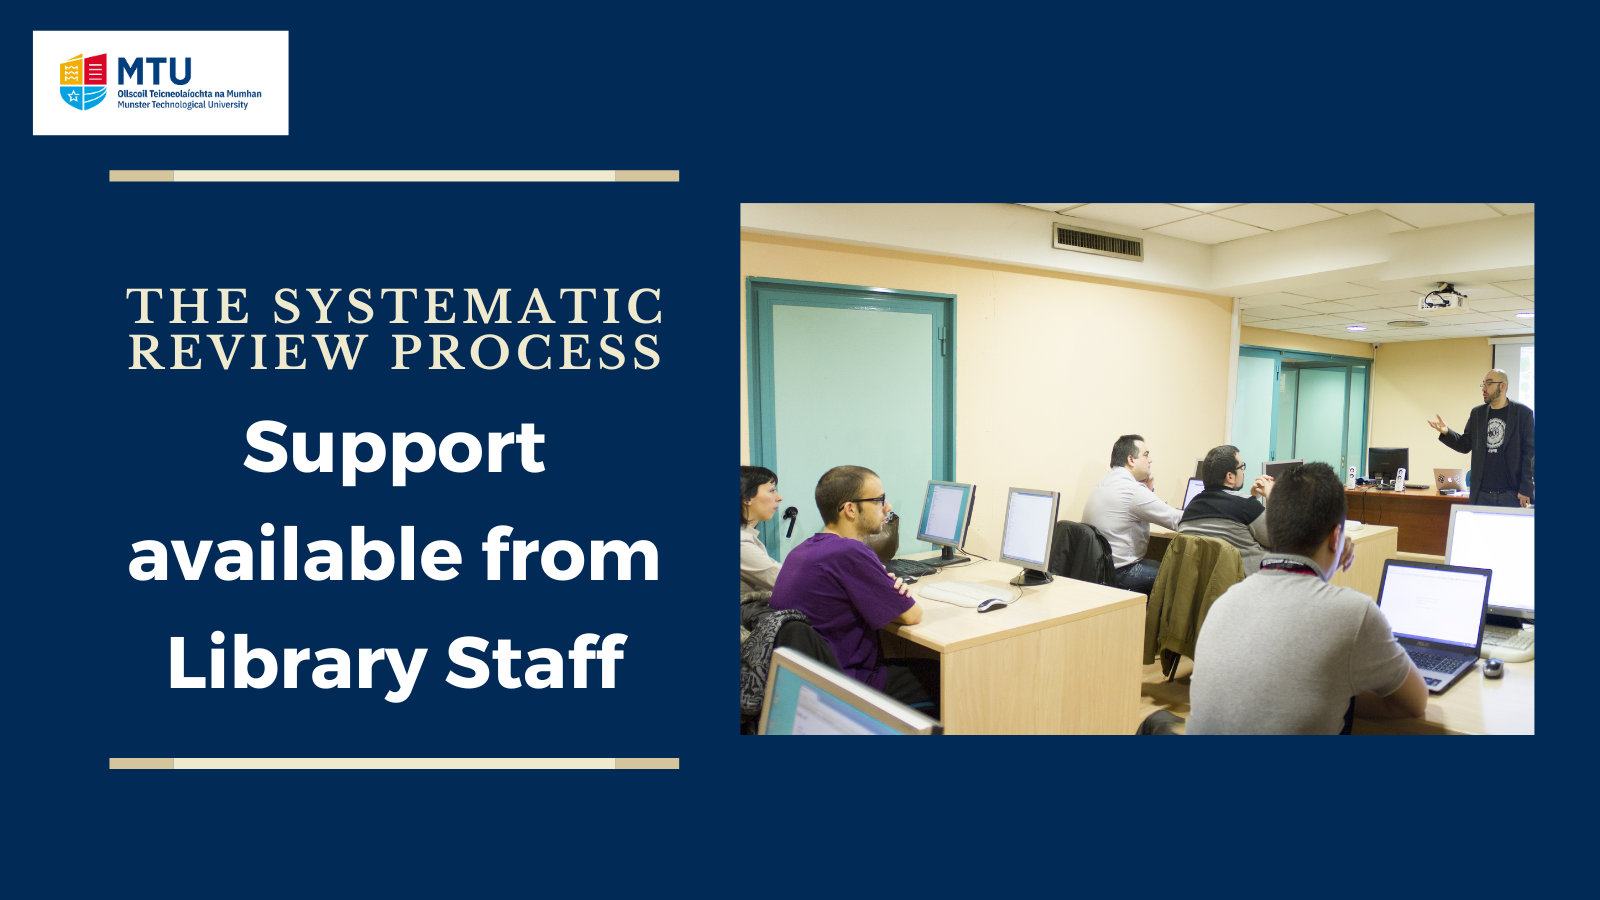 Image promoting library staff support for Systematic Reviews. Image depicts library staff member addressing group of research staff.